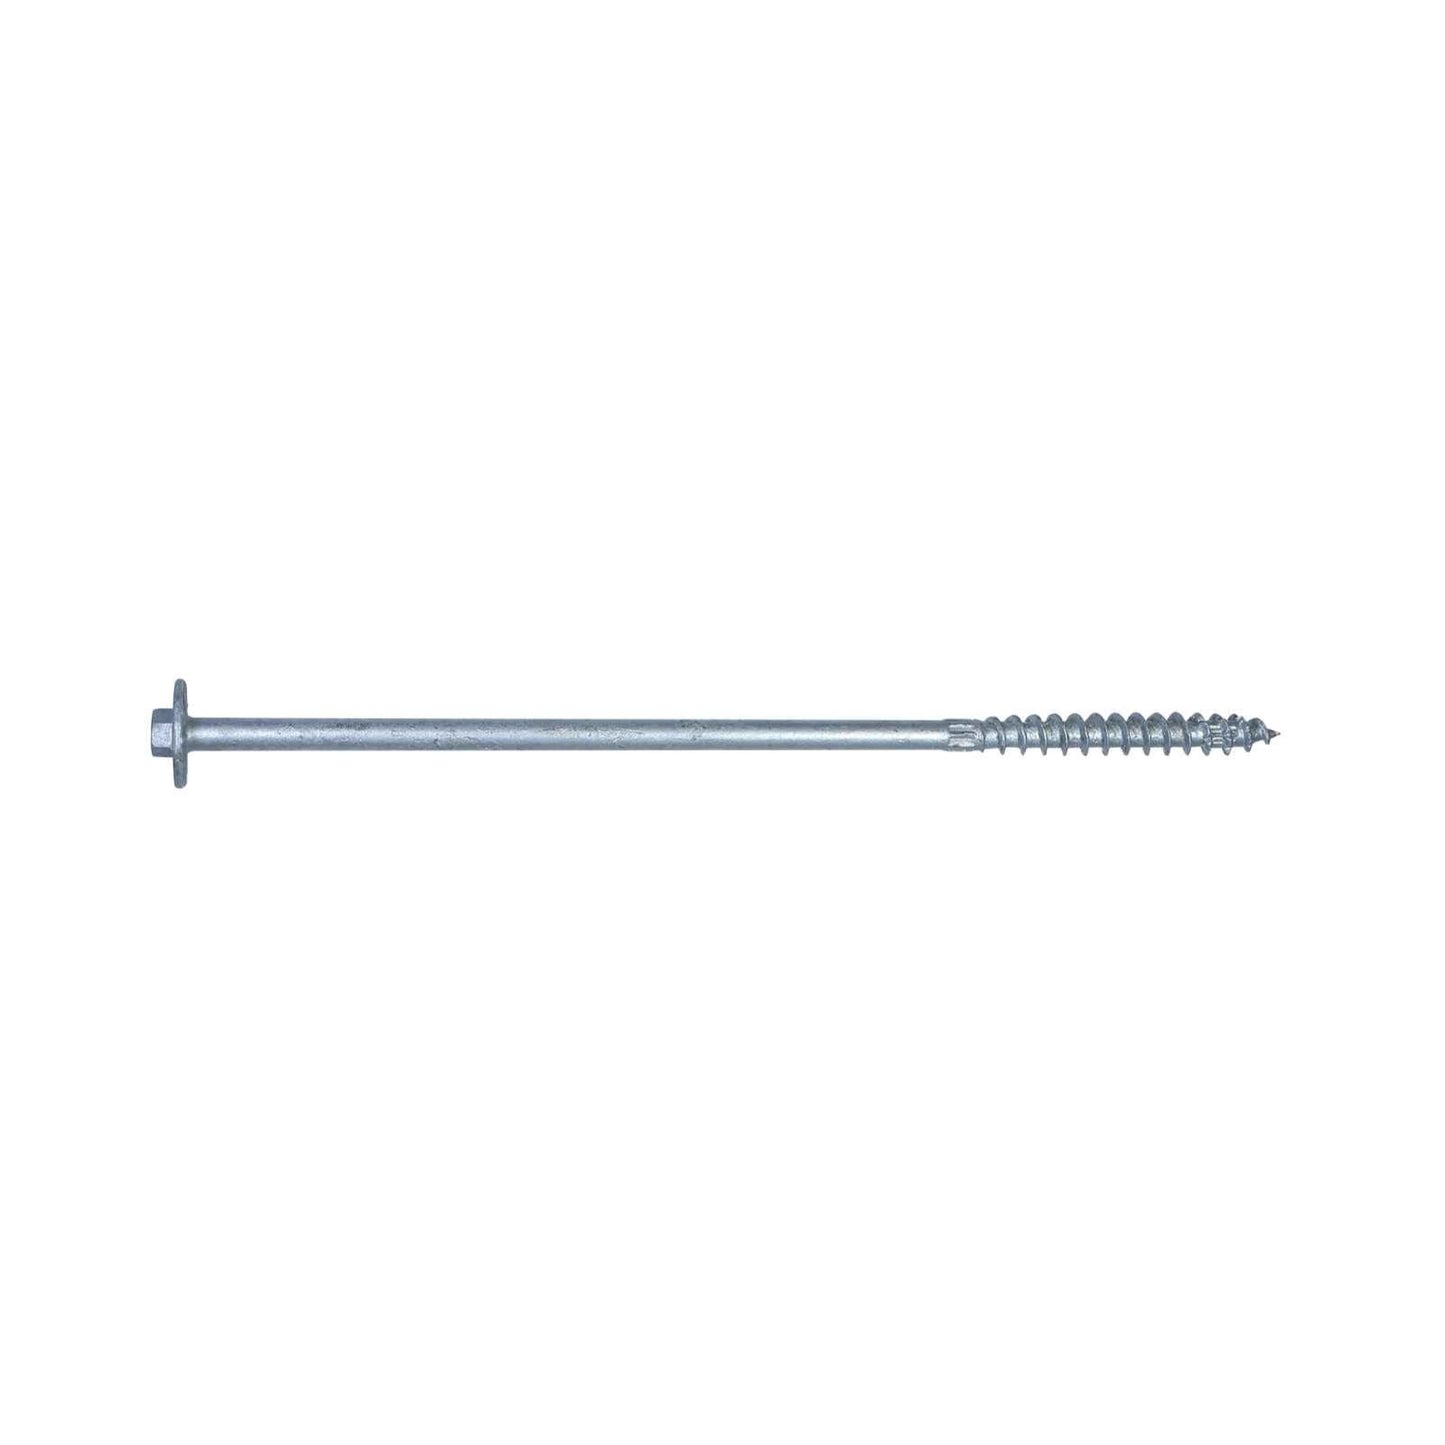 0276 inch x 10 inch StrongTie SDWH Timber Screw Hot Dipped Galvanized Pkg 150